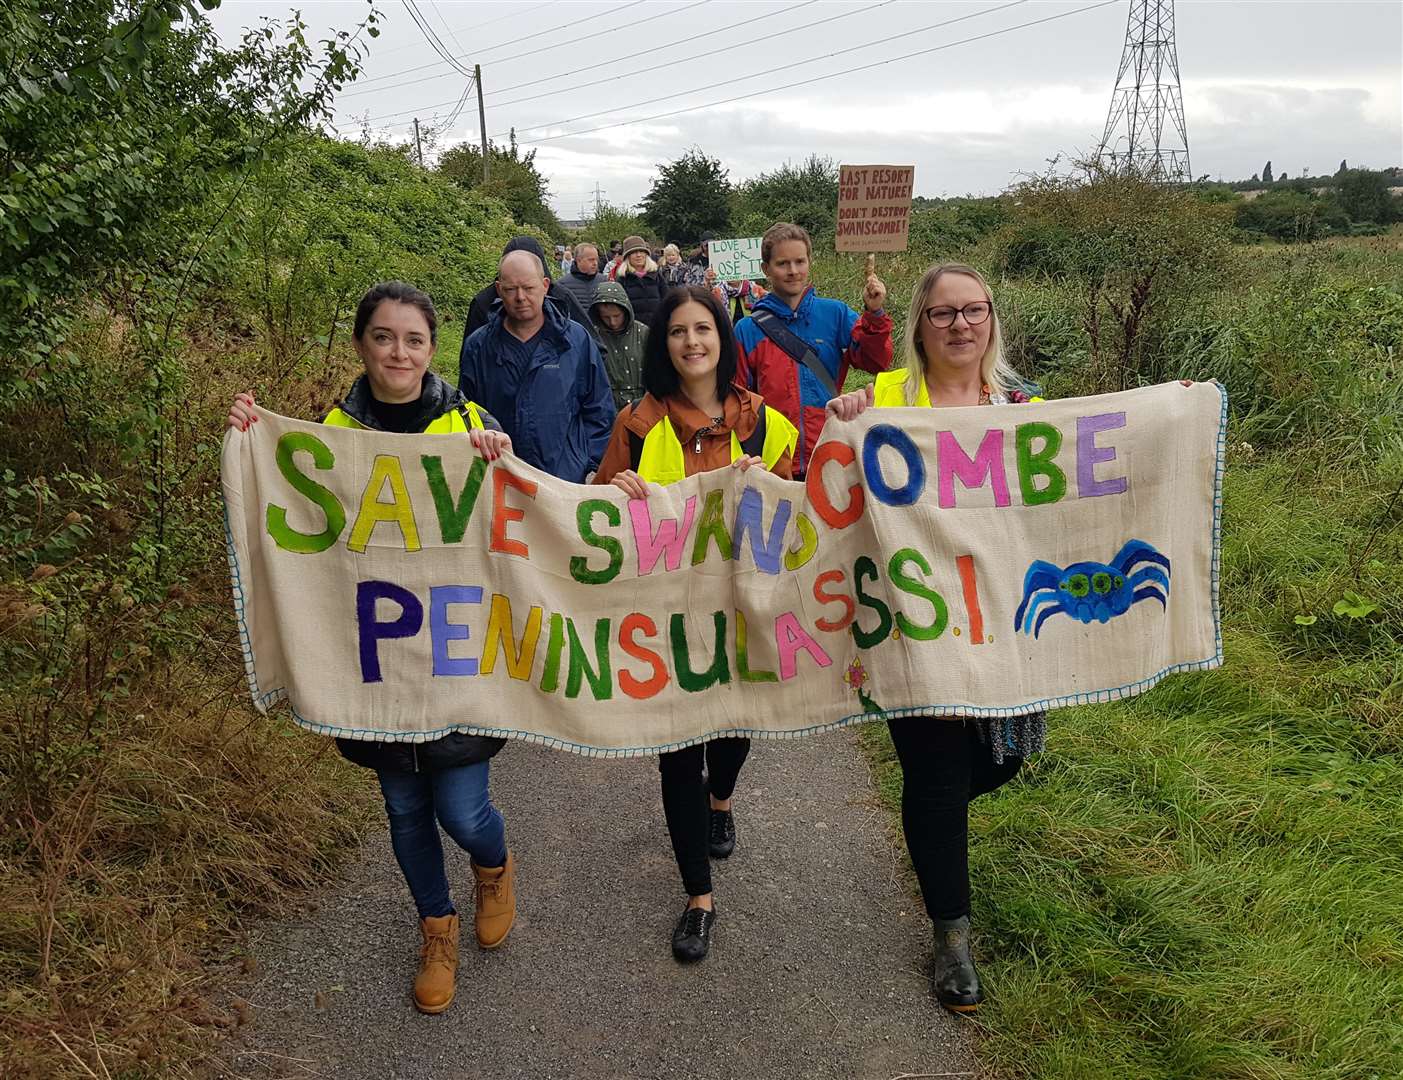 Campaigners came together to protest against plans to build a theme park on the Swanscombe Marshes. Photo: Save Swanscombe Peninsula